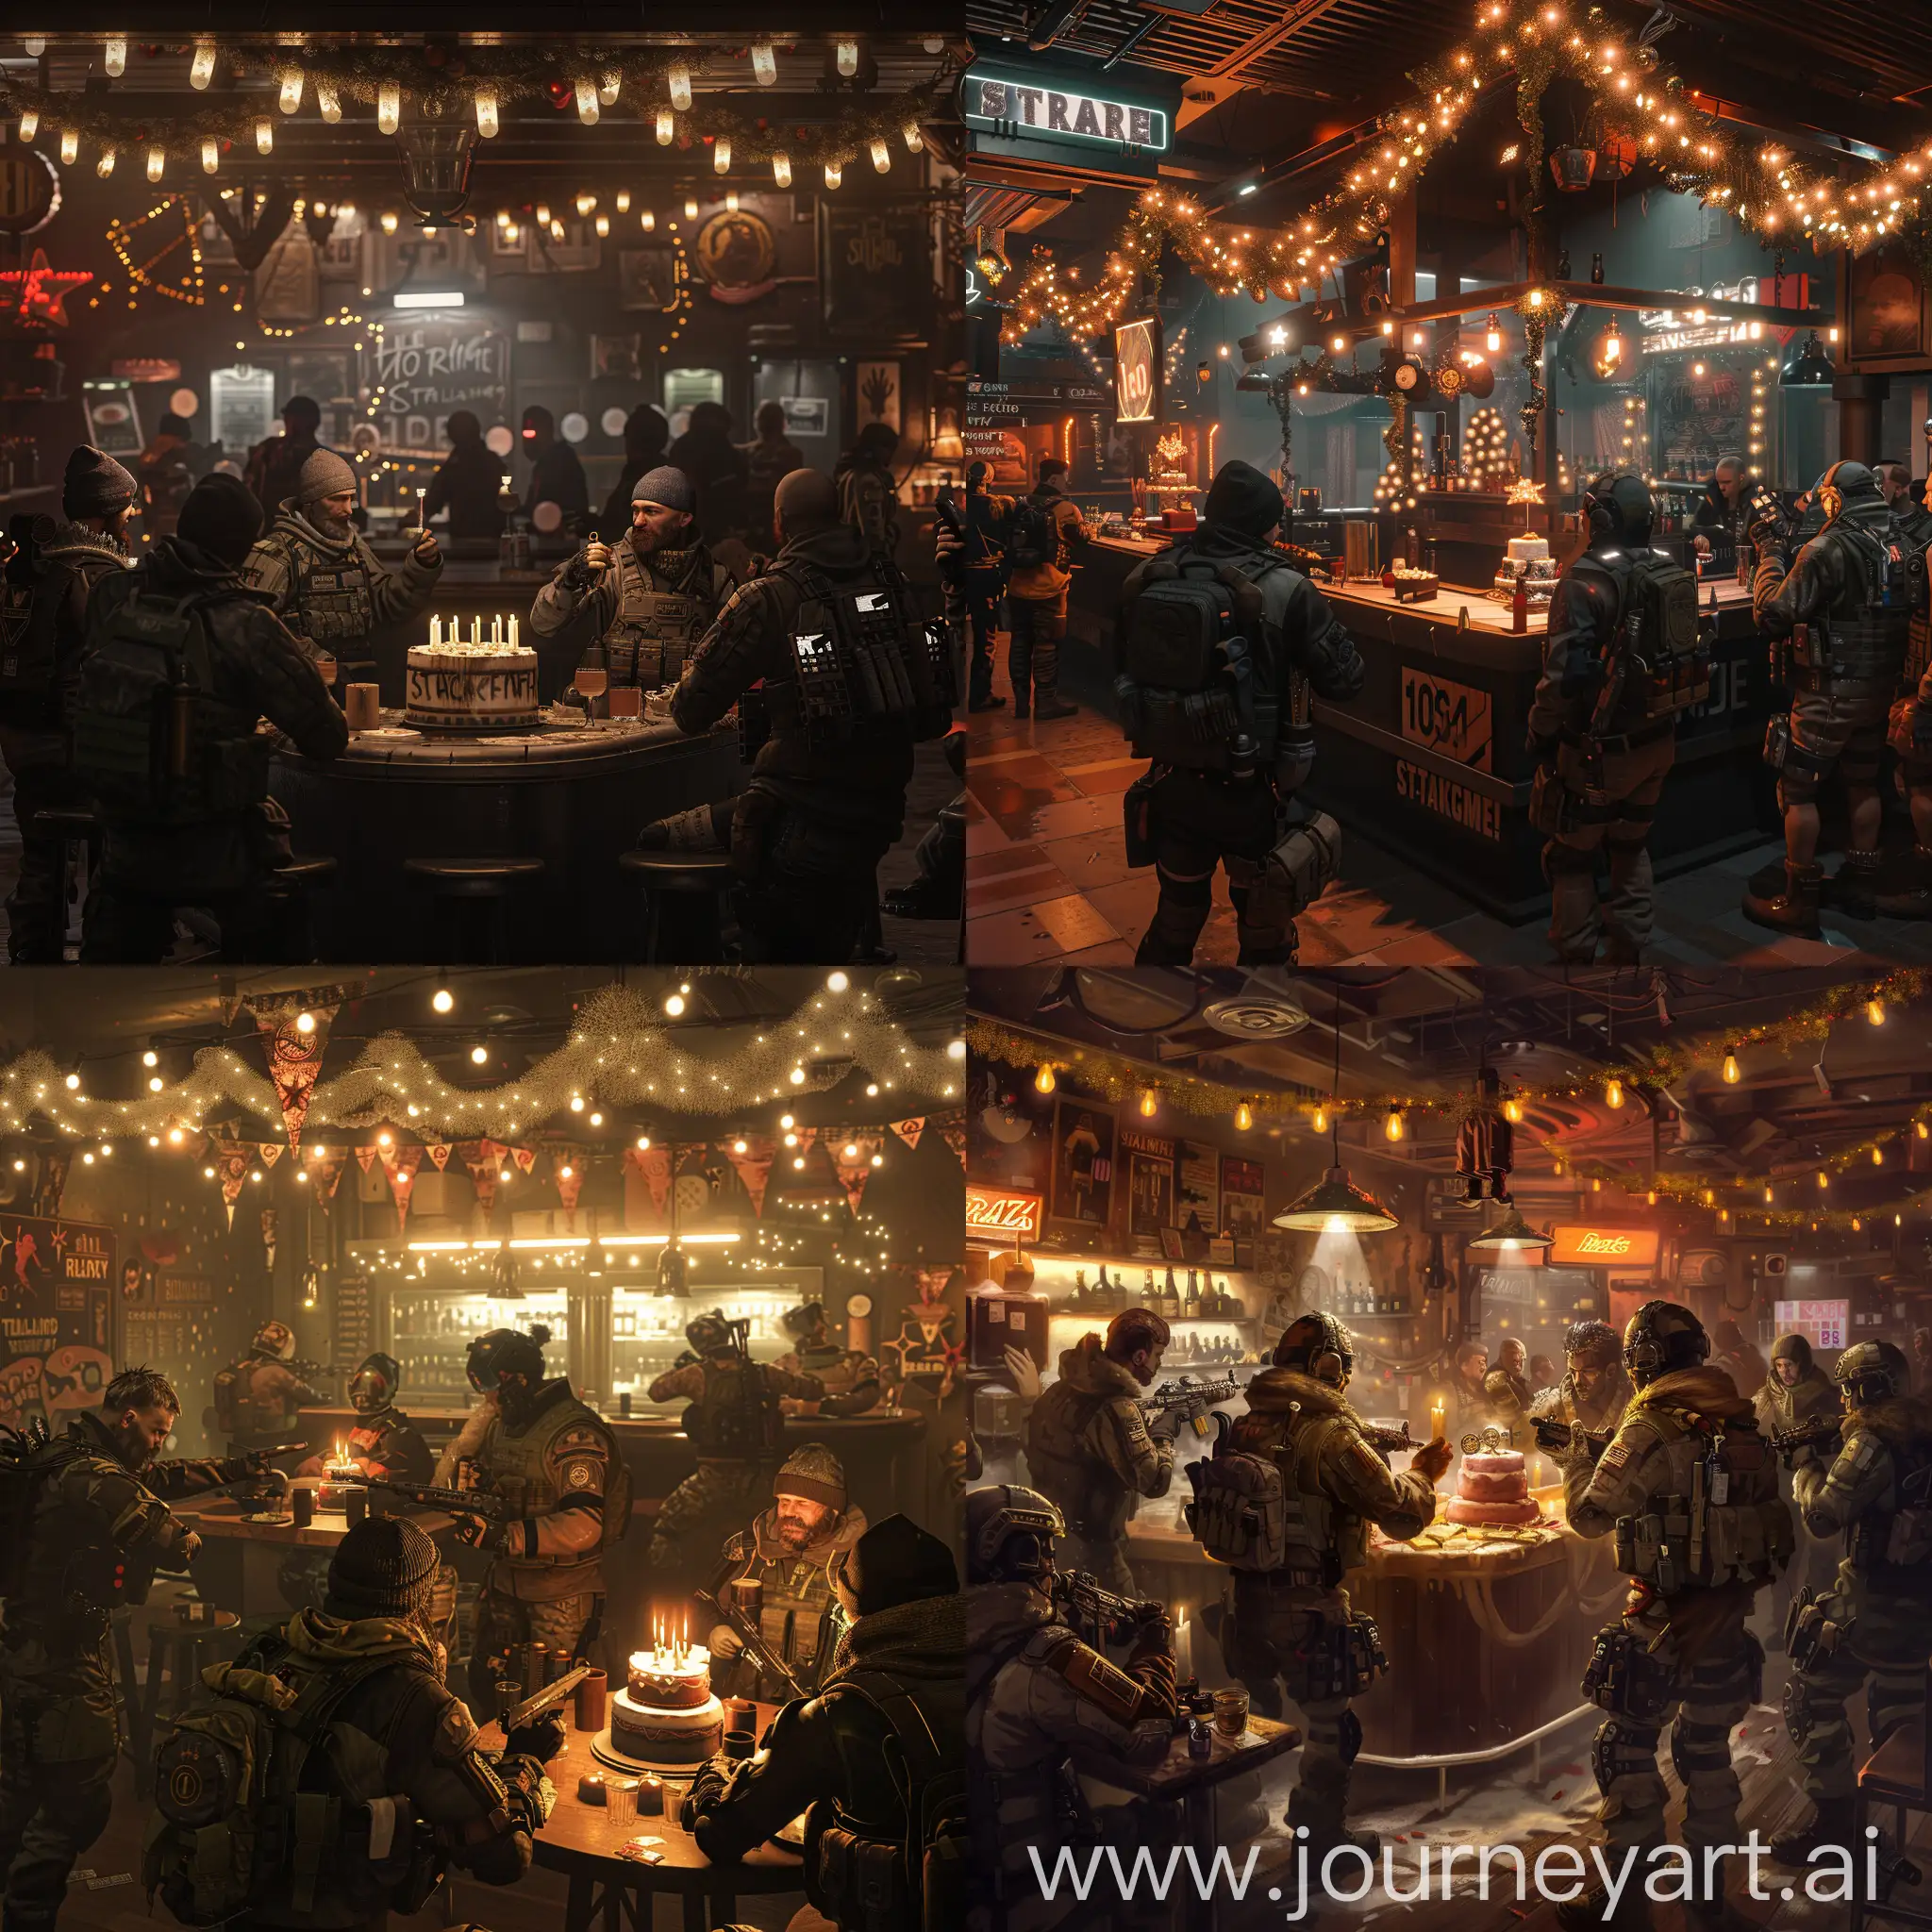 "Stalkers celebrating the 10th Anniversary of Stalcraft in the "100 Rads" bar. The bar is filled with a variety of Stalkers from different factions, each wearing modern 2024 military and tactical gear with realistic camouflage patterns and equipment. In the center, a large cake decorated with candles and the words "Stalcraft 10 Anniversary". The bar is decorated with warm white garlands, artifact-themed decorations, and faction posters on the walls. The bar owner stands behind a complex, warmly lit counter, serving drinks. Some Stalkers dance to live music, while others sit at tables lifting toasts. The lighting consists of warm, dim lights from garlands and candles on tables, creating a cozy and intimate glow. The atmosphere includes slight mist, softly burning candles, and shining artifacts, giving a sense of celebration within the familiar eeriness of the S.T.A.L.K.E.R. universe,4K,yltra realistic